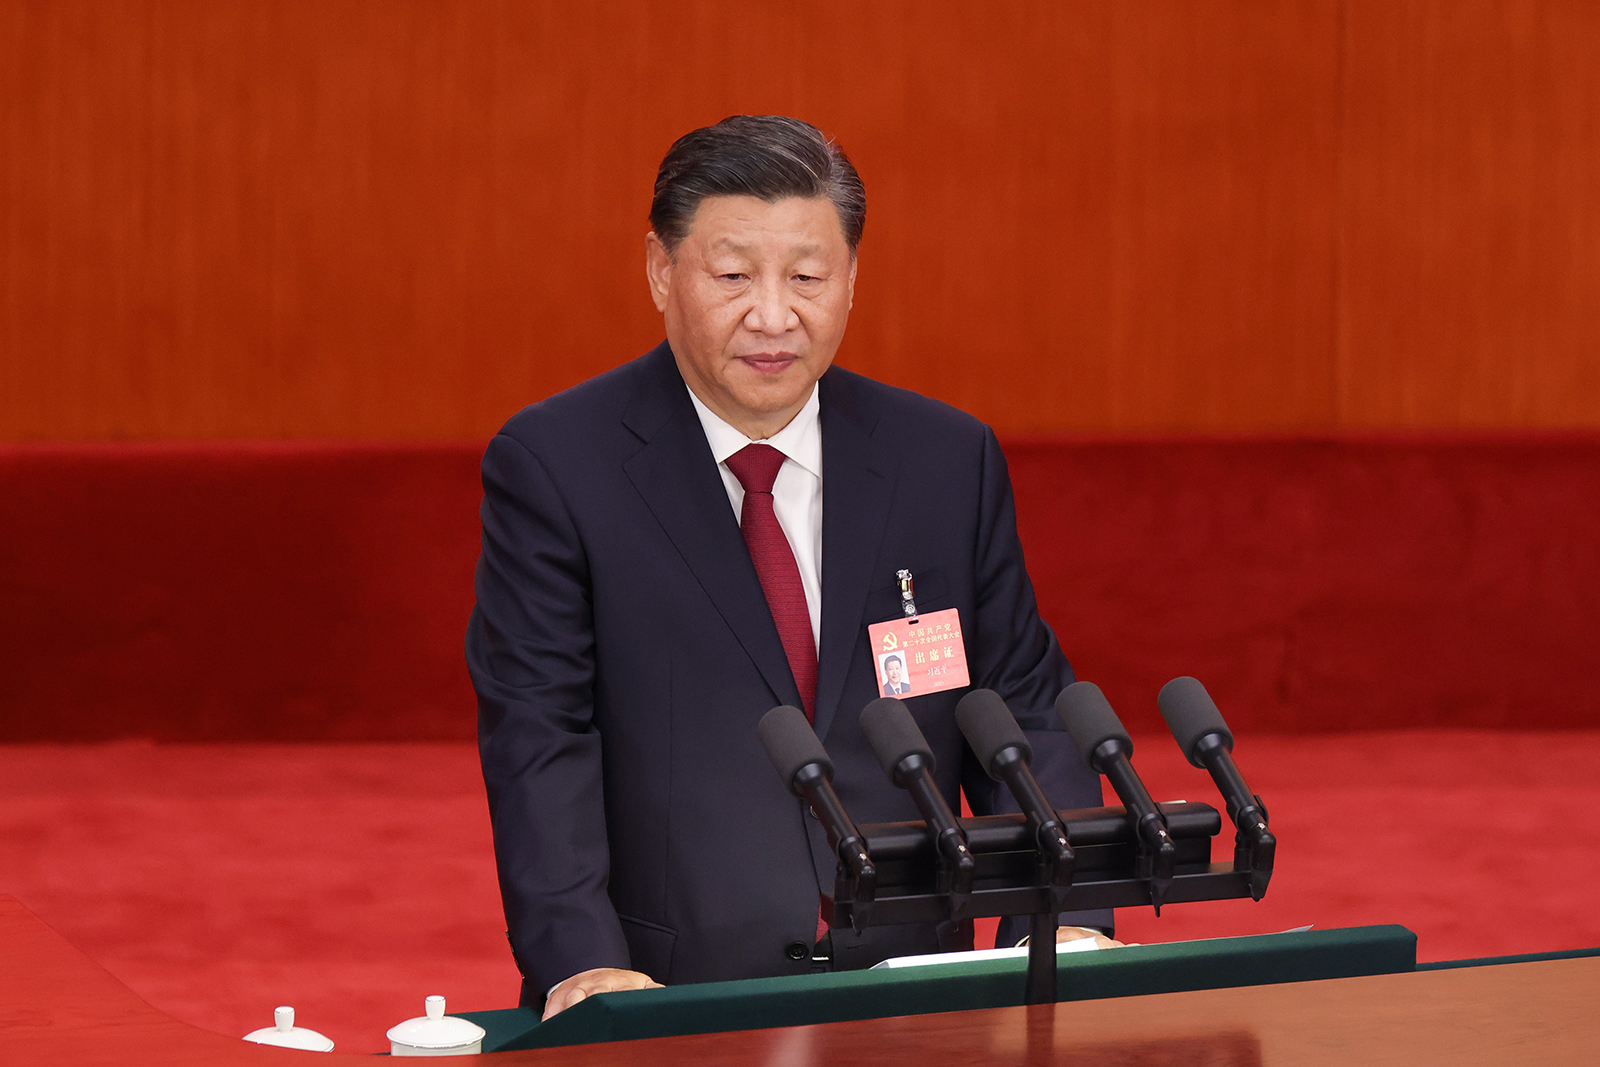 Chinese President Xi Jinping delivers a speech during the opening session of the 20th National Congress of the Communist Party of China (CPC) in Beijing on October 16.